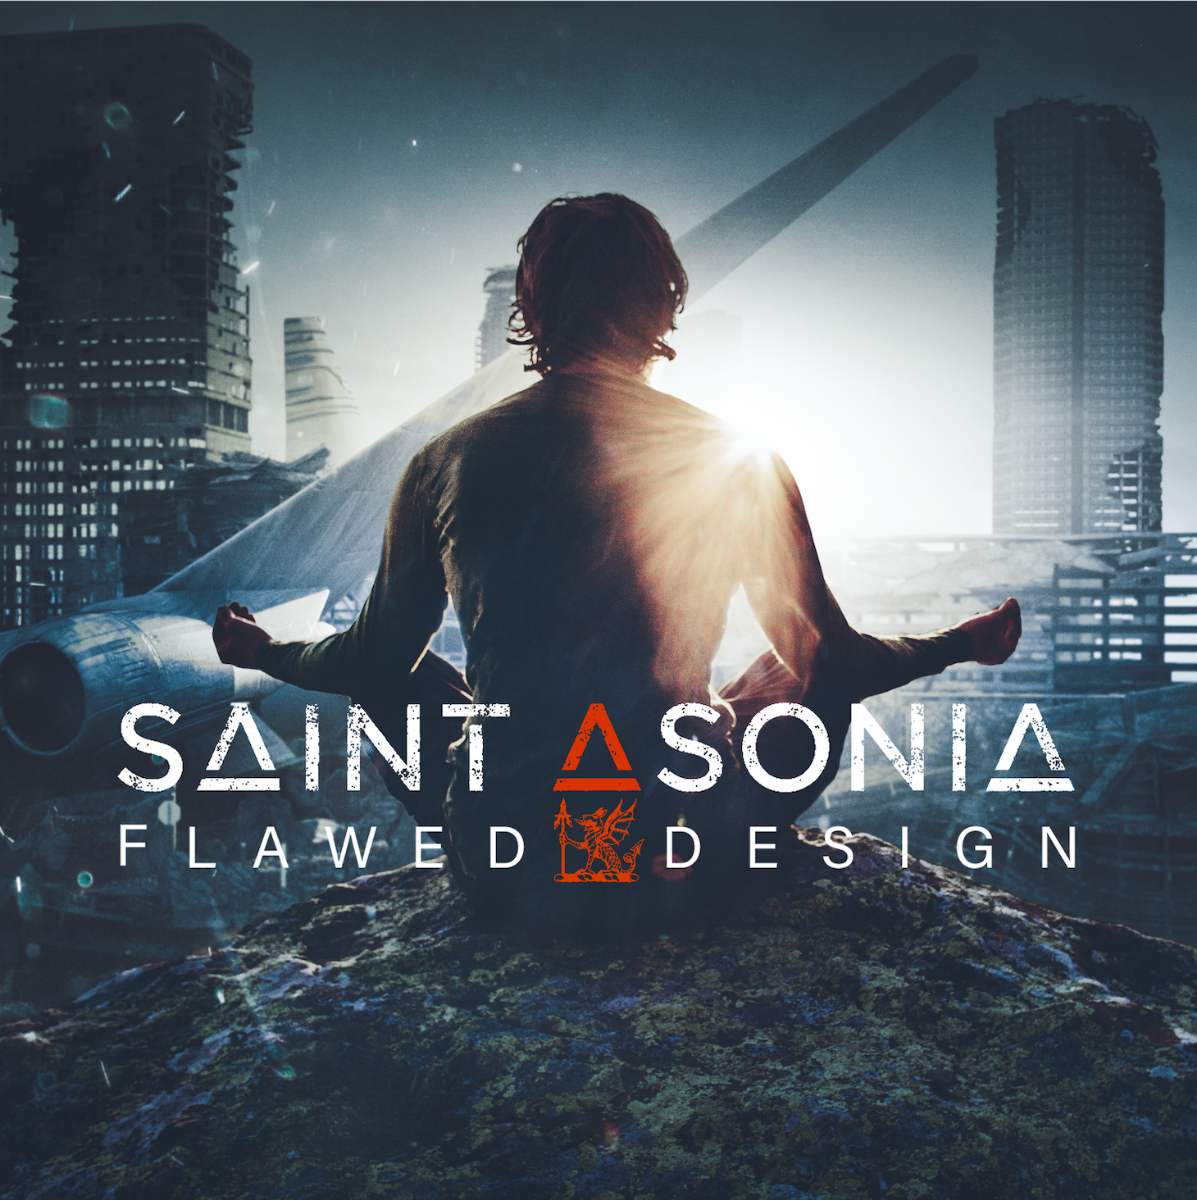 Saint Asonia Drop "The Hunted" Video + New Song "Beast" + New Album "Flawed Design" Out 10/25